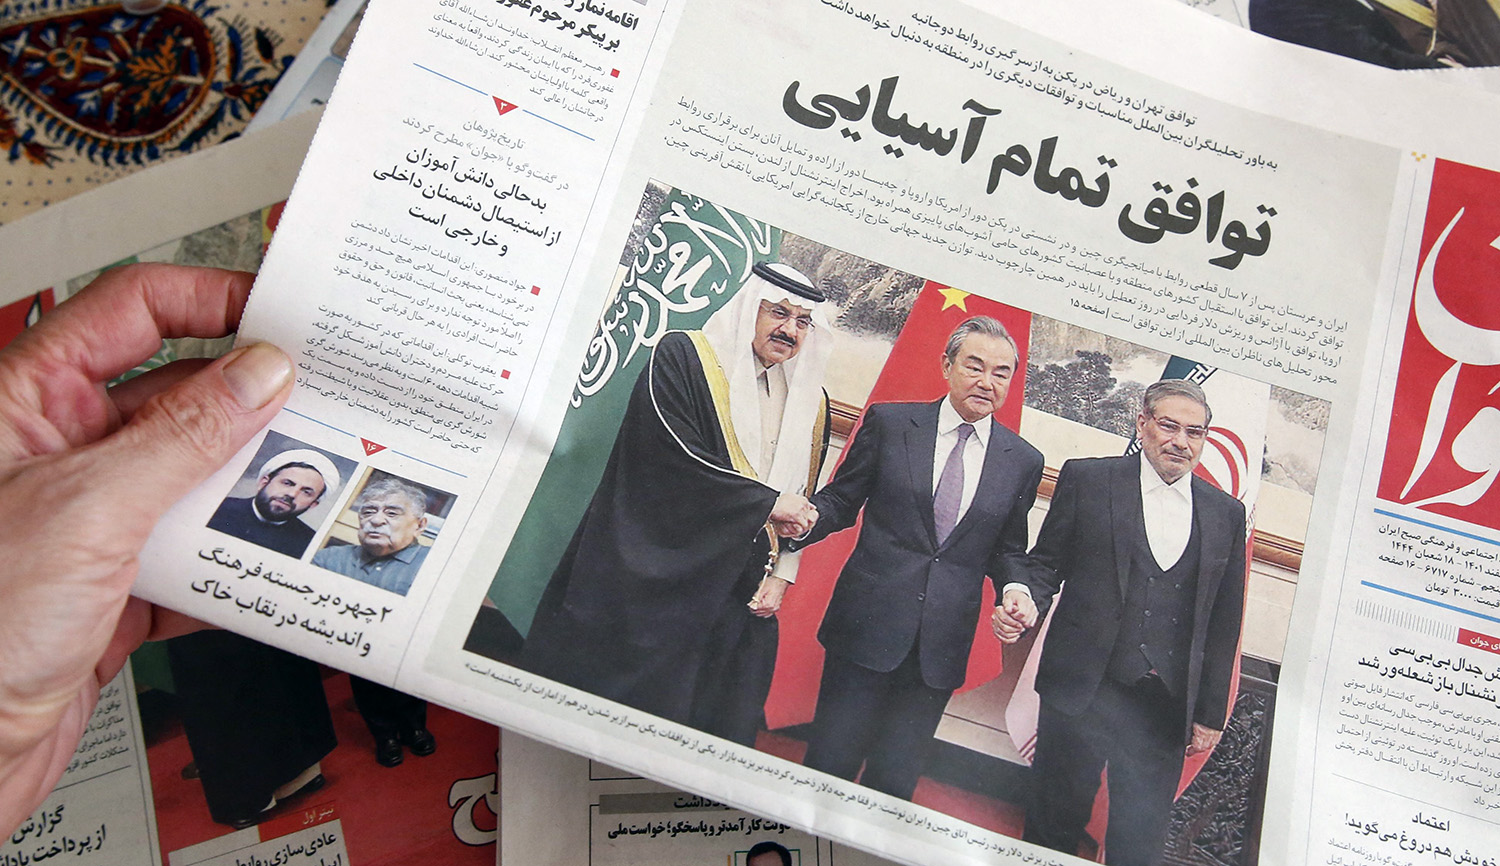 
A man in Tehran holds a newspaper reporting the China-brokered deal between Iran and Saudi Arabia to restore ties, signed in Beijing the previous day, on March, 11 2023. ATTA KENARE/AFP via Getty Images.






